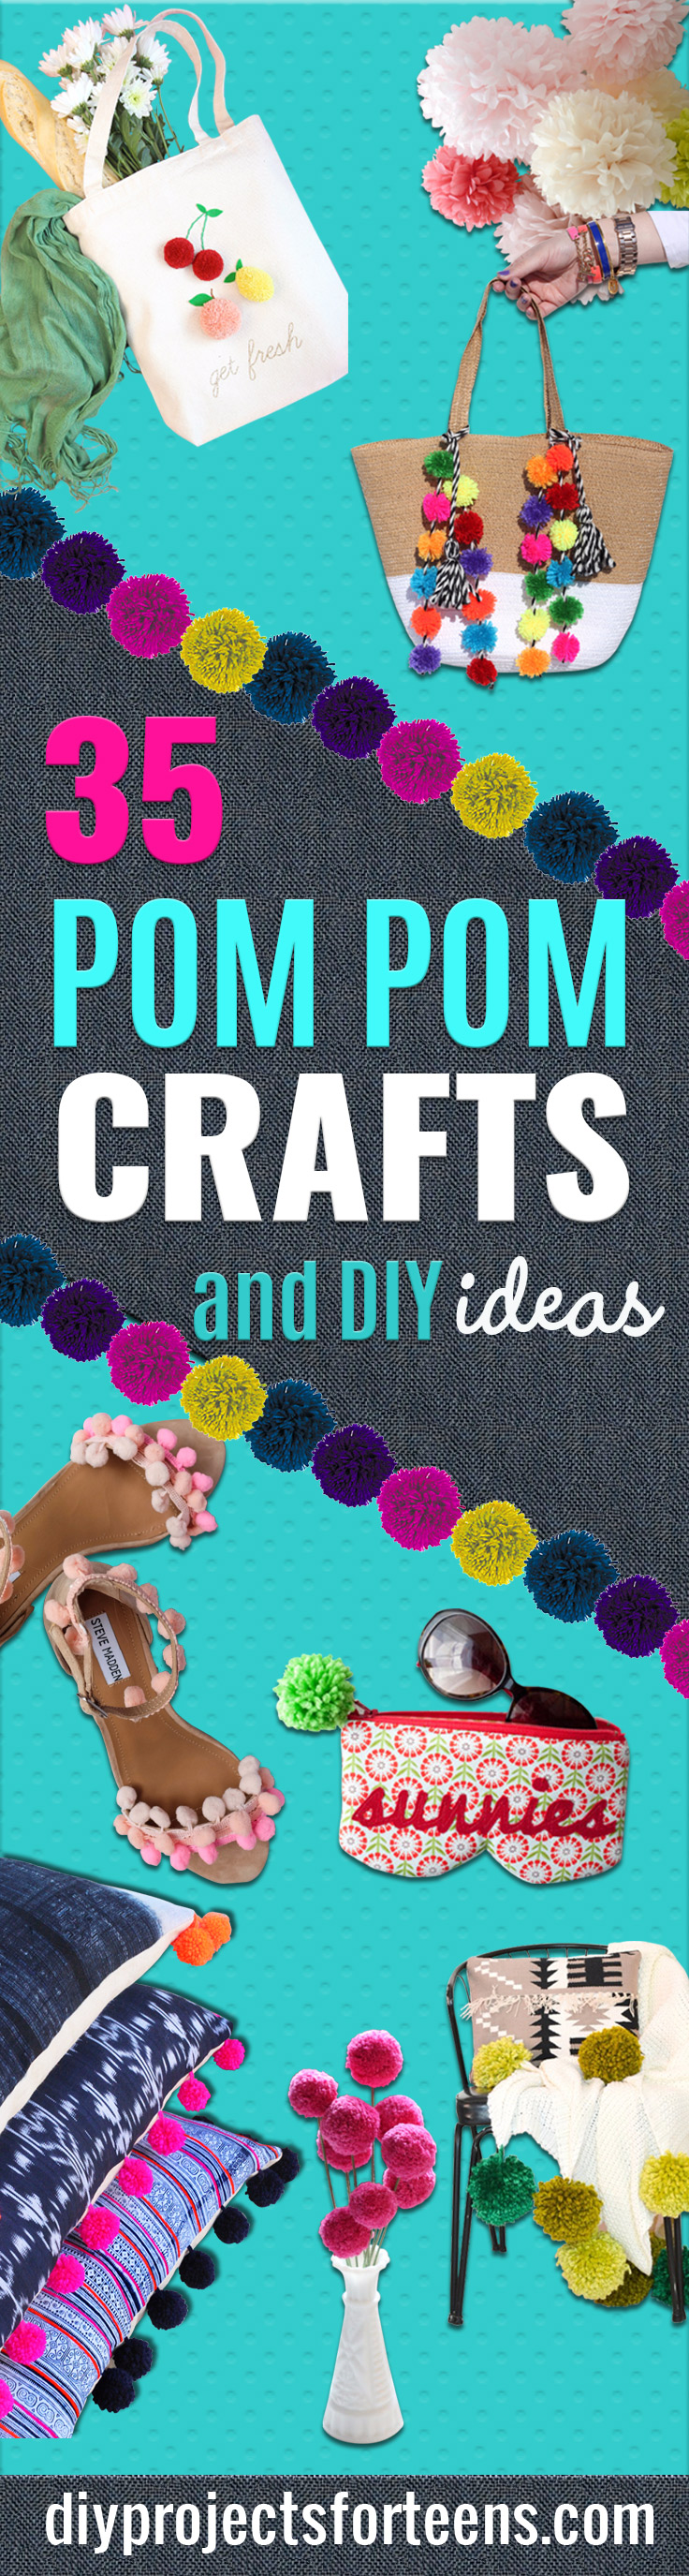 DIY Crafts with Pom Poms - Fun Yarn Pom Pom Crafts Ideas. Garlands, Rug and Hat Tutorials, Easy Pom Pom Projects for Your Room Decor and Gifts http://stage.diyprojectsforteens.com/diy-crafts-pom-poms